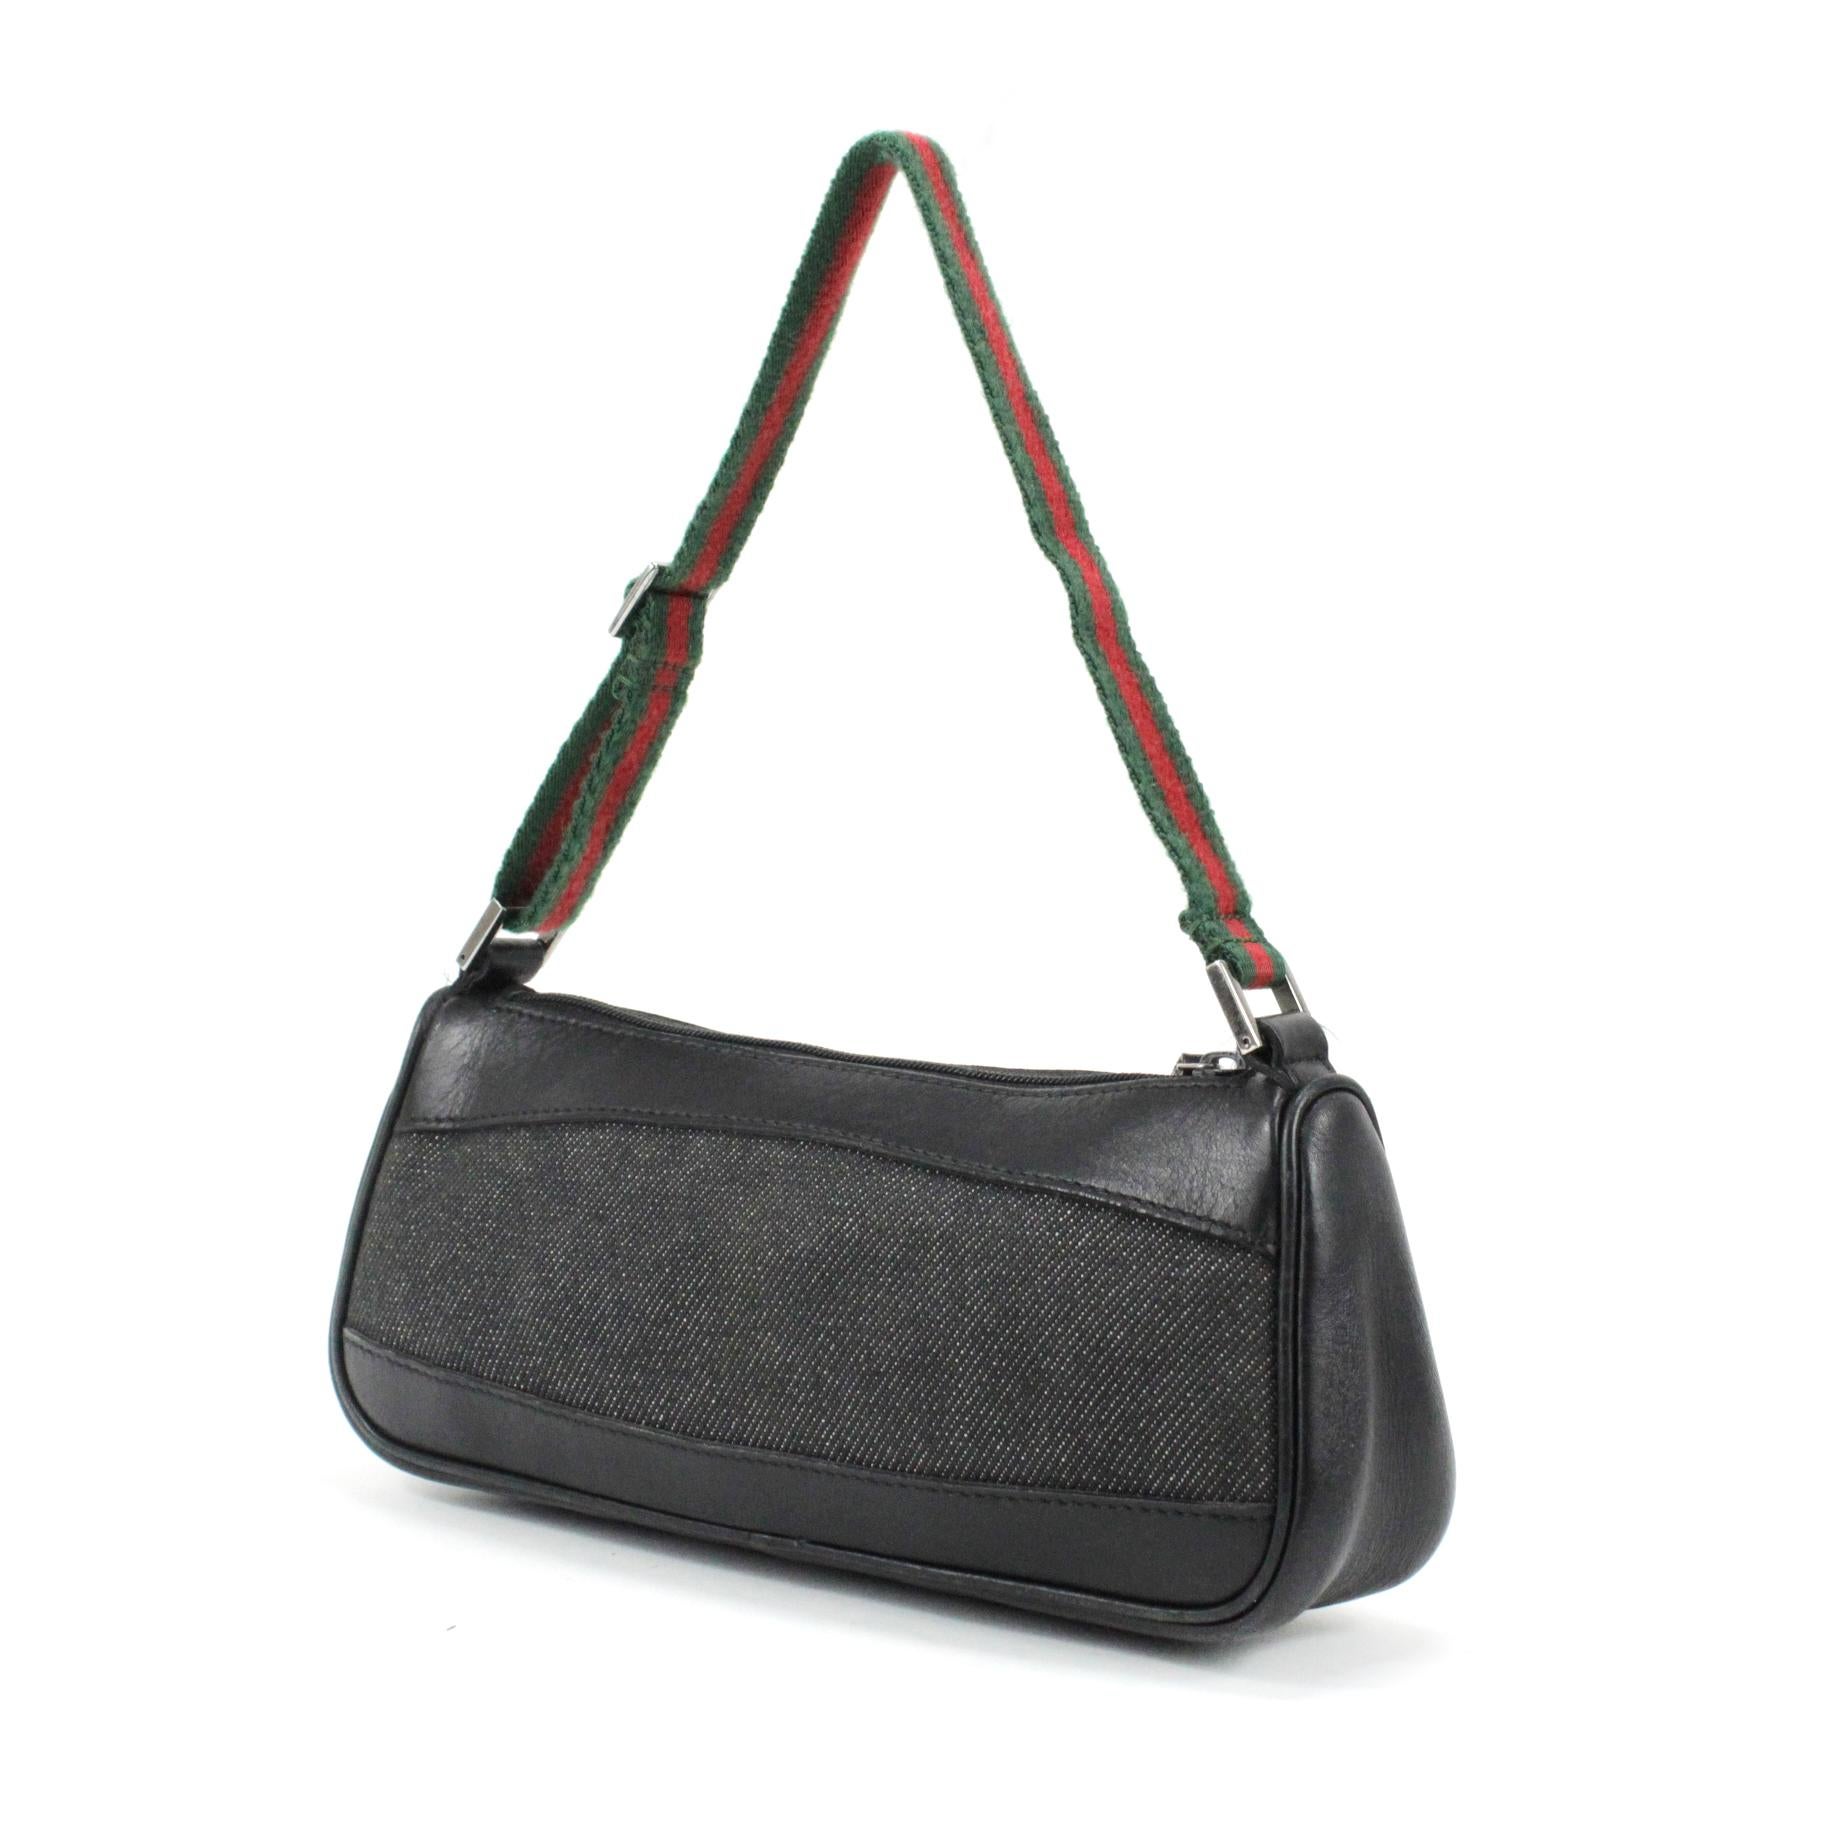 Gucci bag in anthracite denim + leather color black, red and green adjustable handle. 

Condition: 
Good.

Measurements: 
Width: 20 cm
Height: 9 cm
Depth: 5,5 cm 
